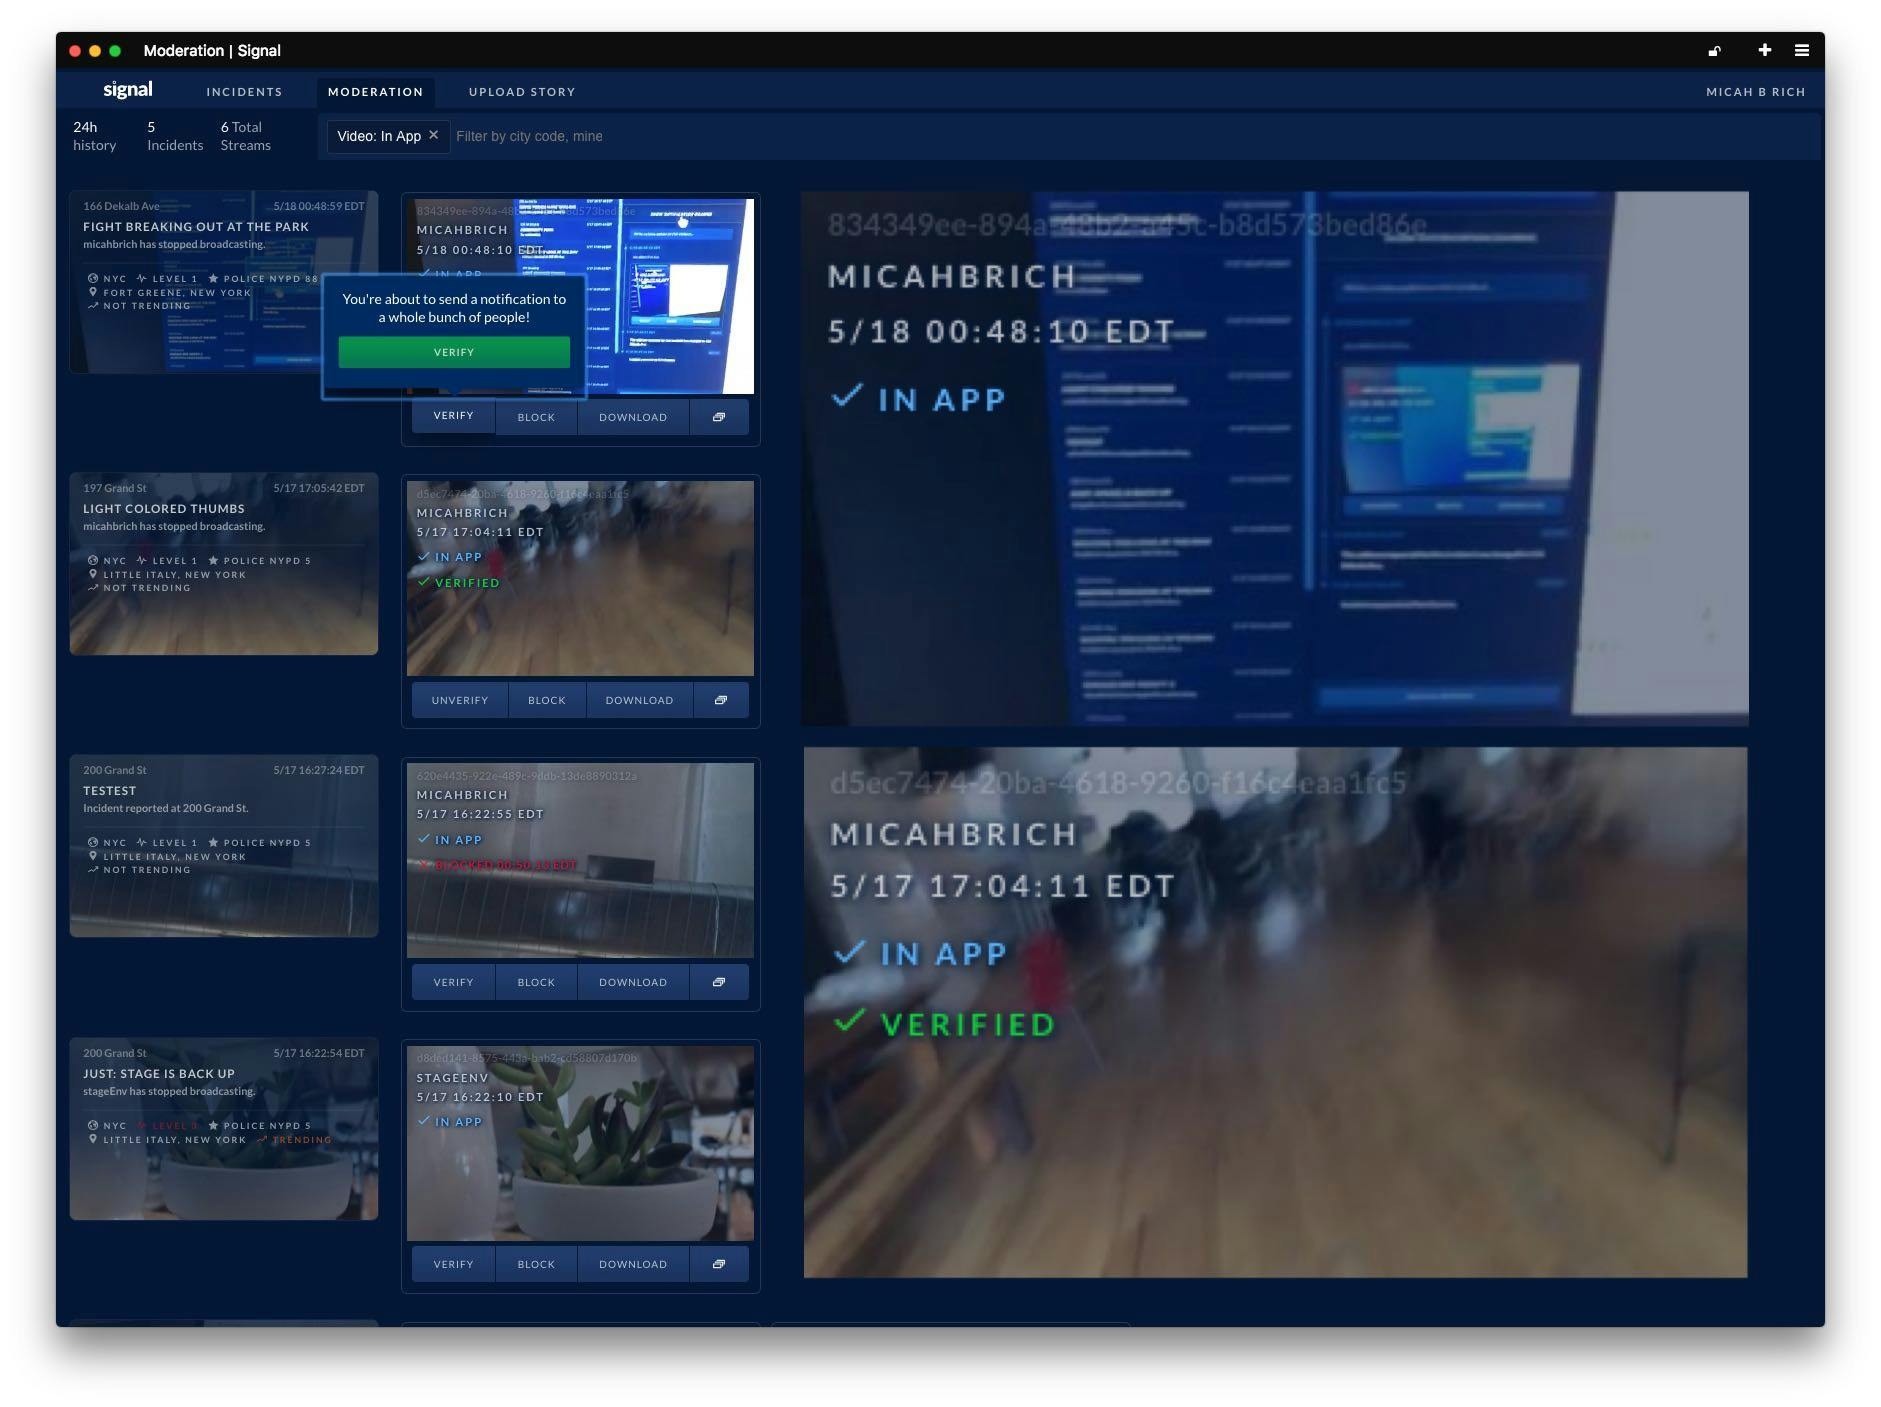 Designed & developed a realtime video monitoring system for the team to watch, approve, or reject live video crime reports.